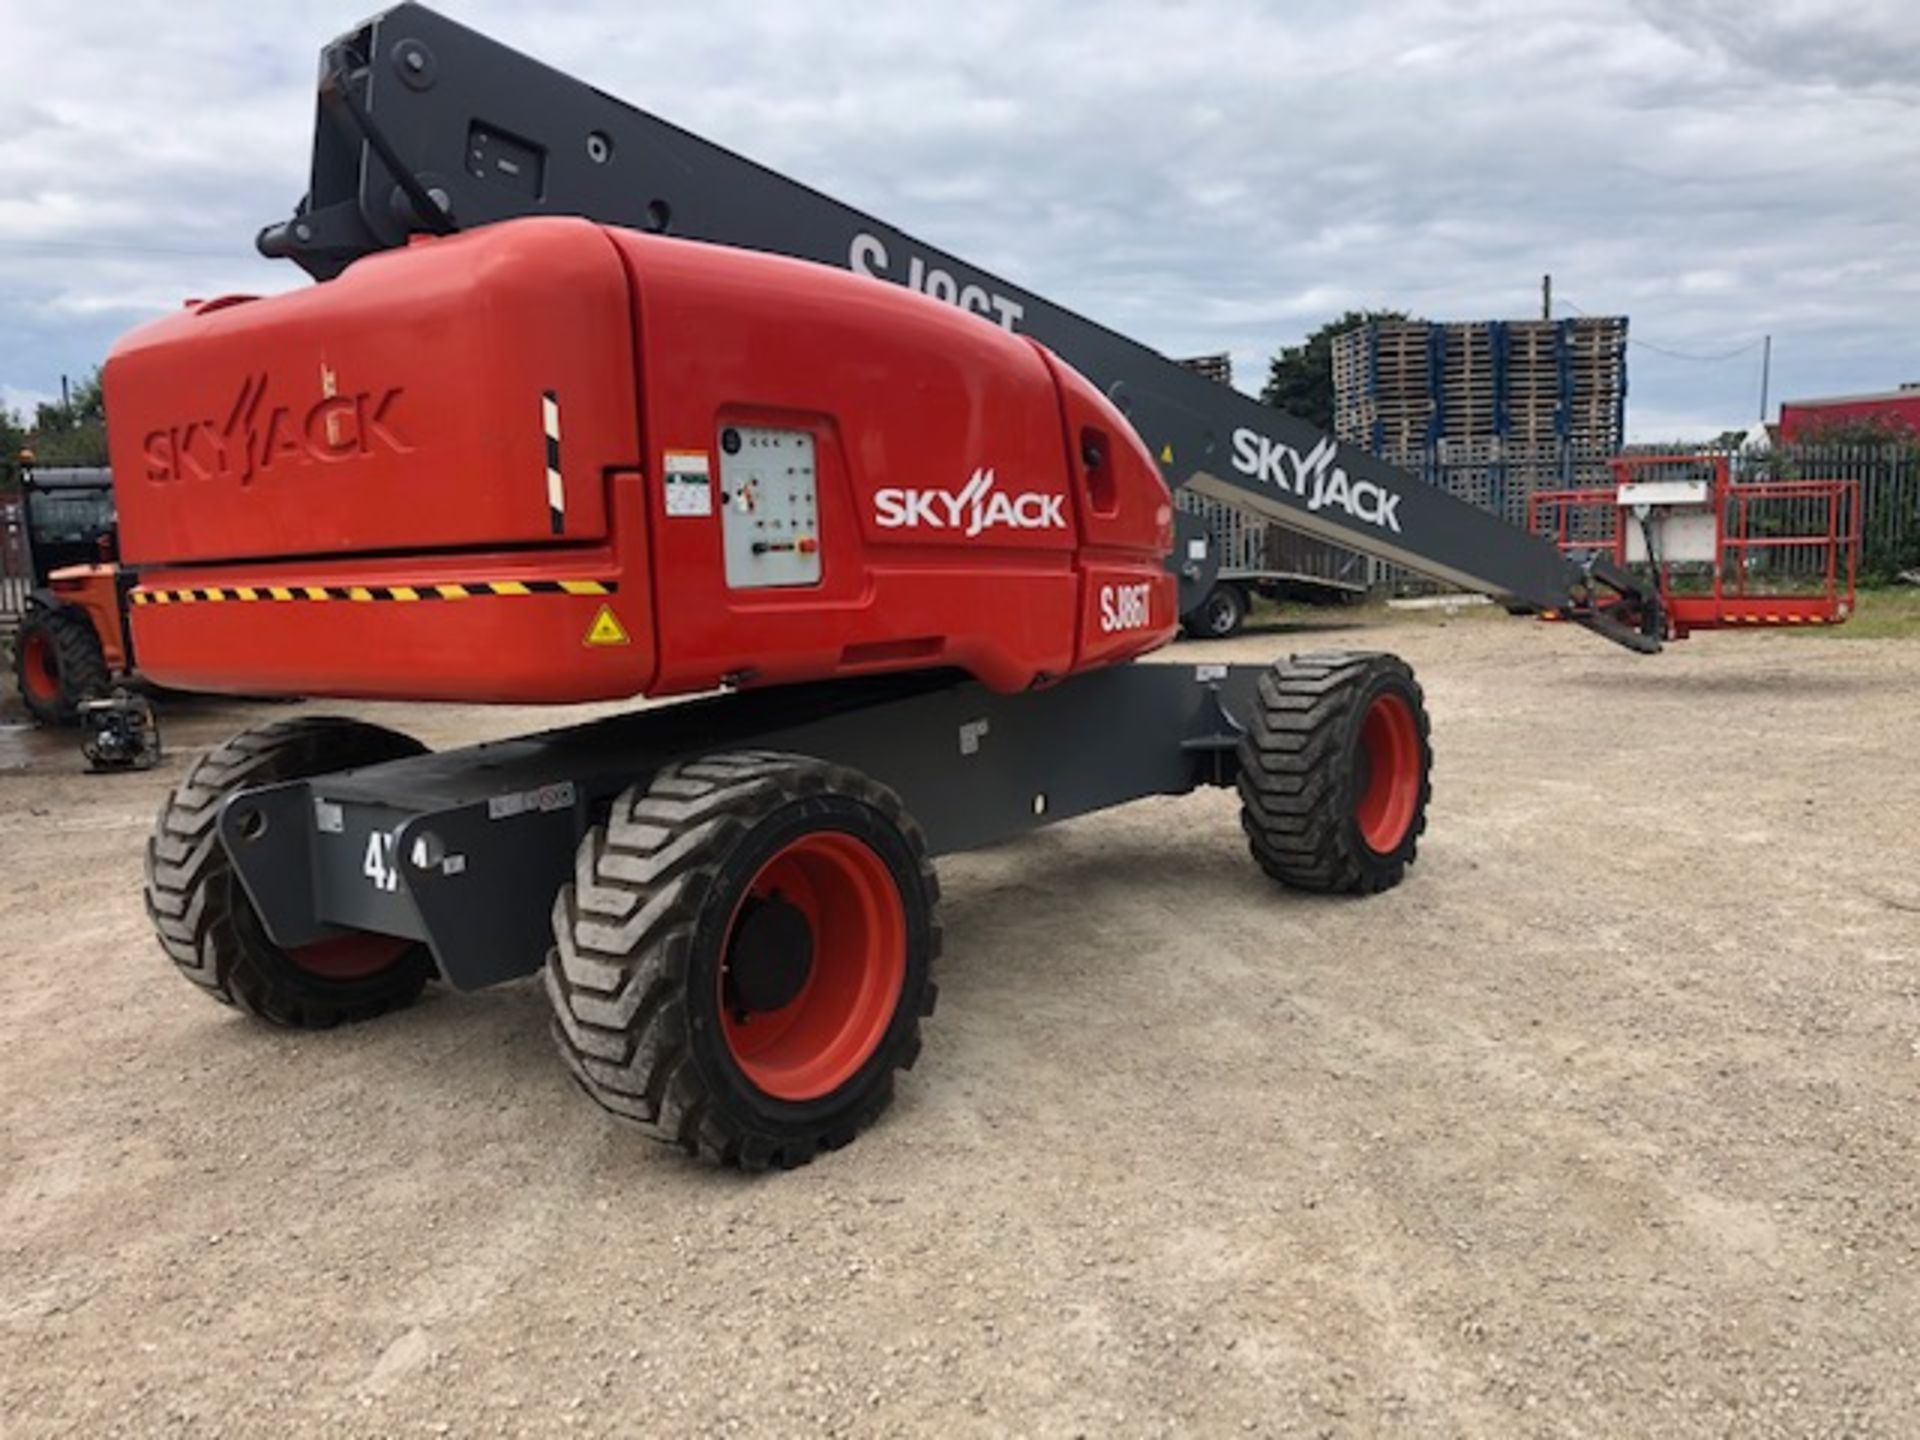 CHERRY PICKER SJ86T ACCESS PLATFORM MEWP, ONLY 260 HOURS FROM NEW, BUILT IN 2018 BUT A 2019 MODEL - Image 3 of 8